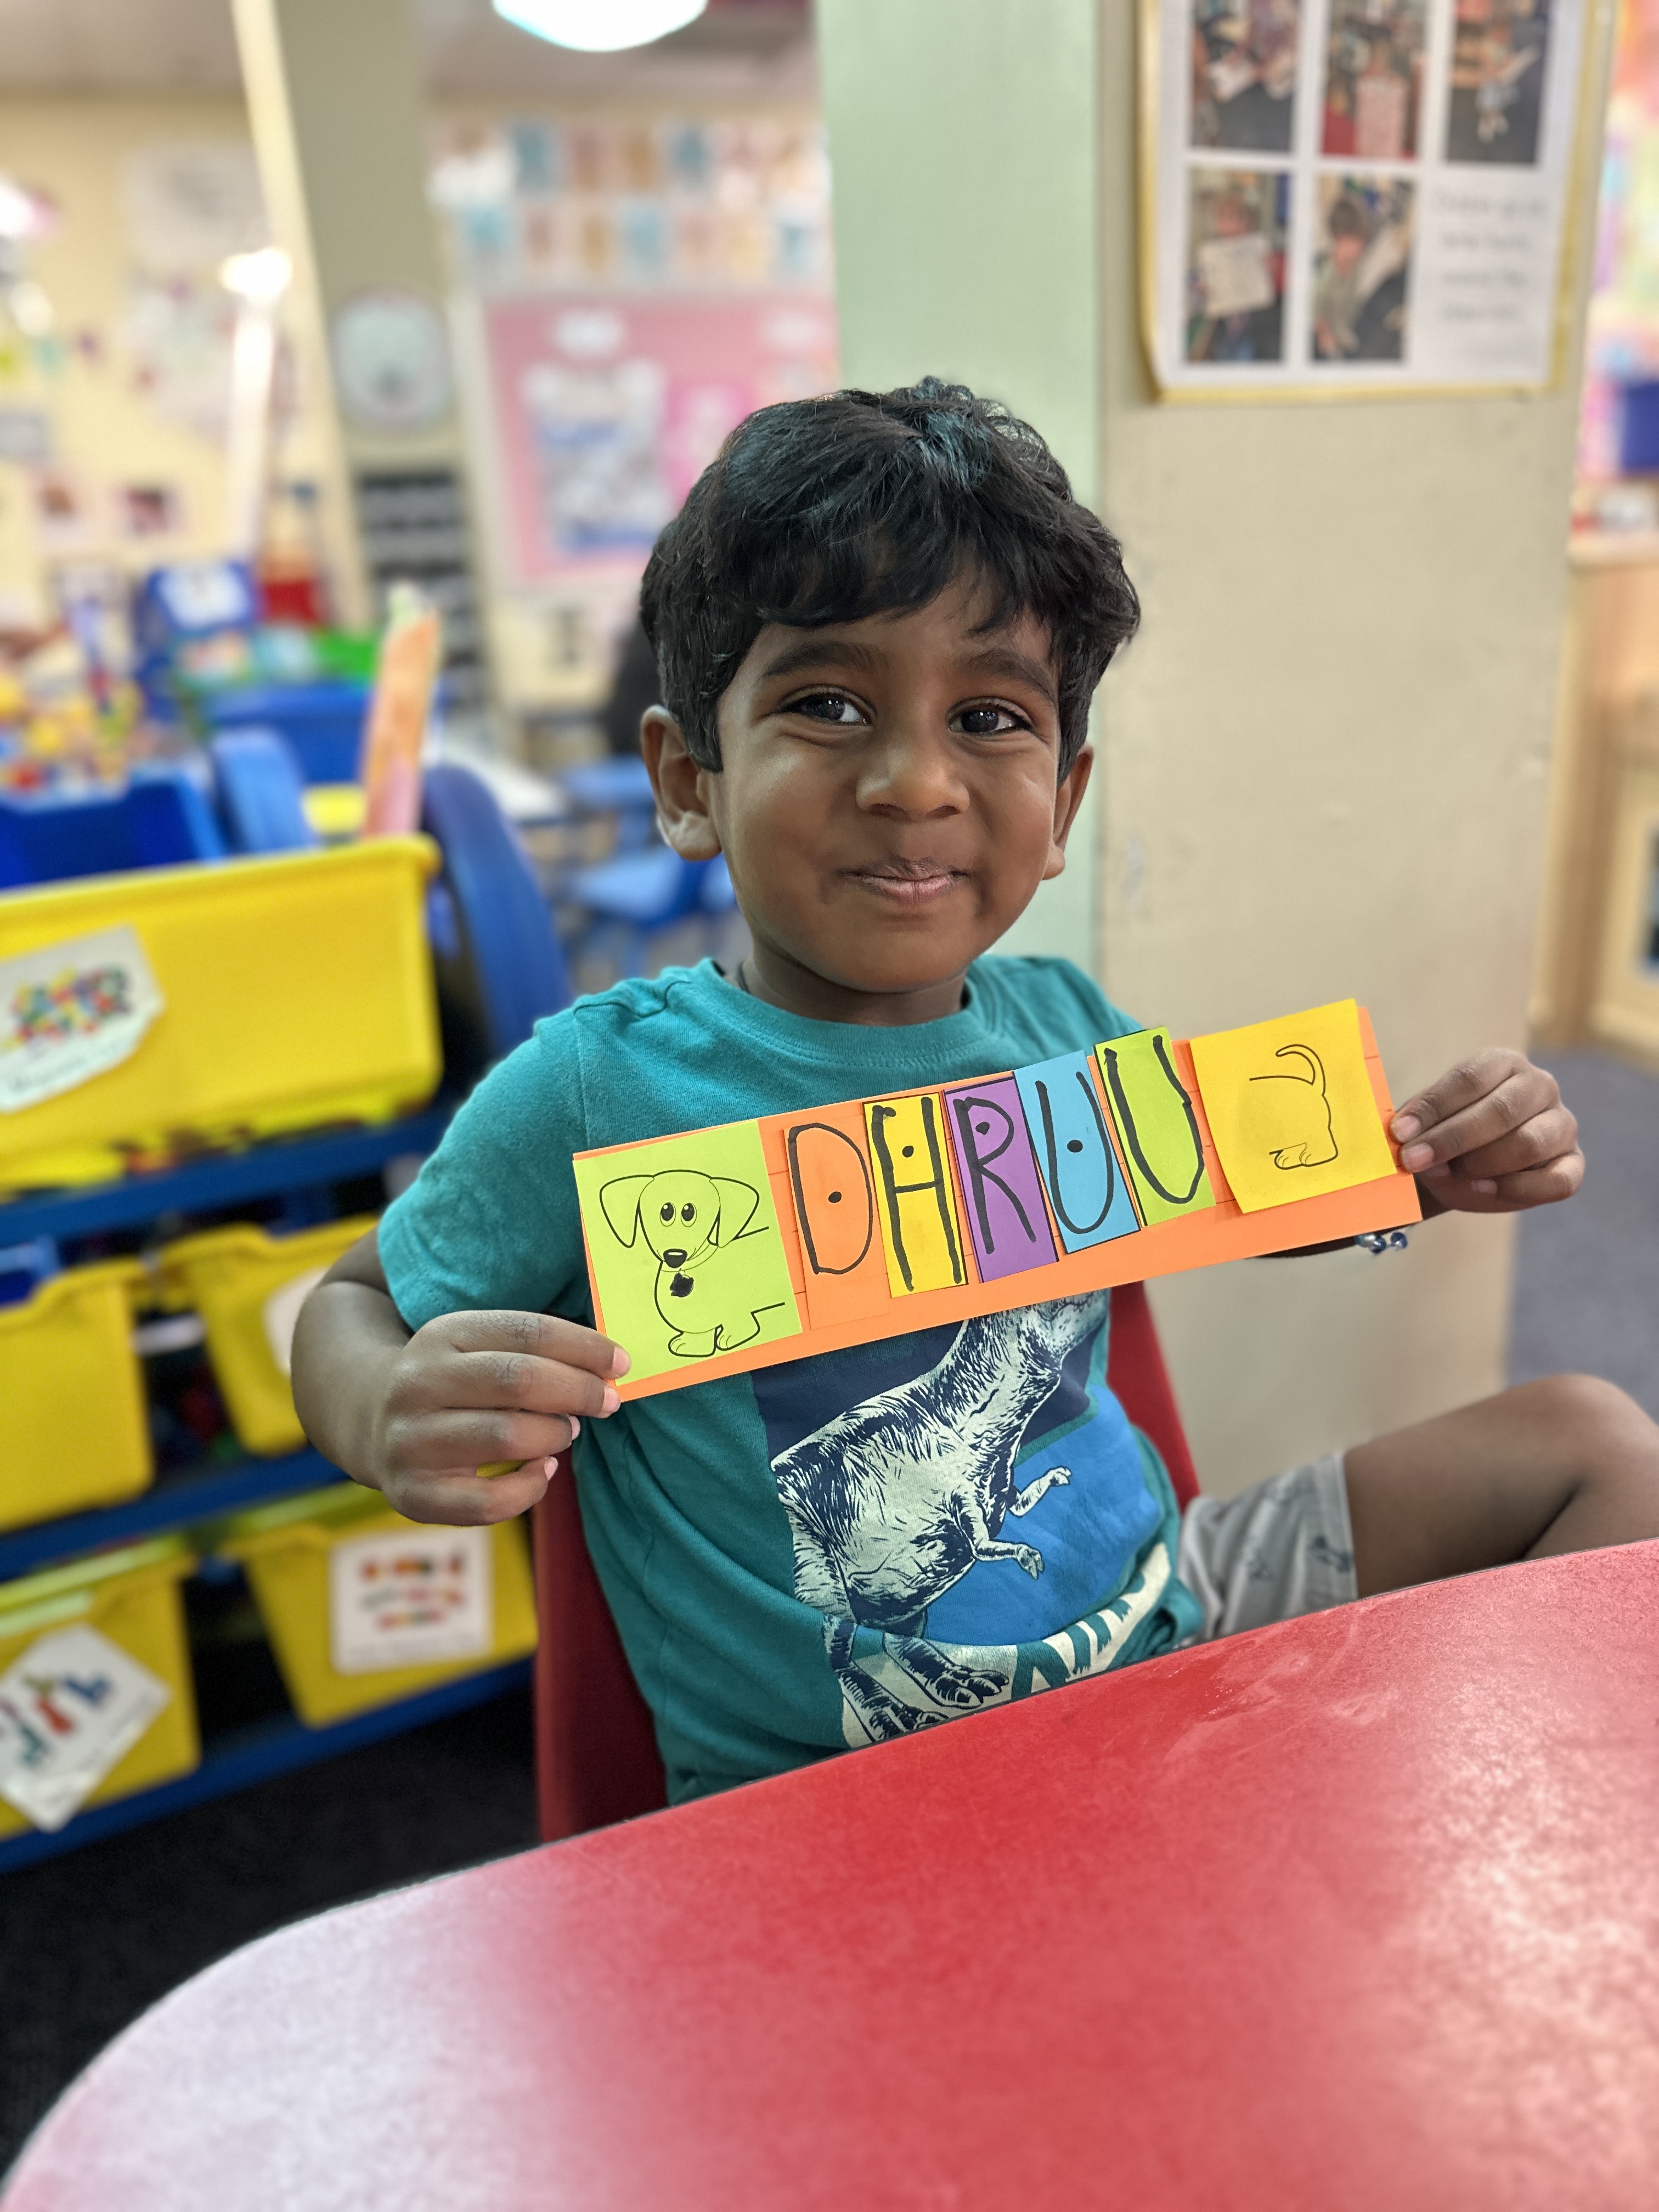 A student proudly shows off the name card he crafted.